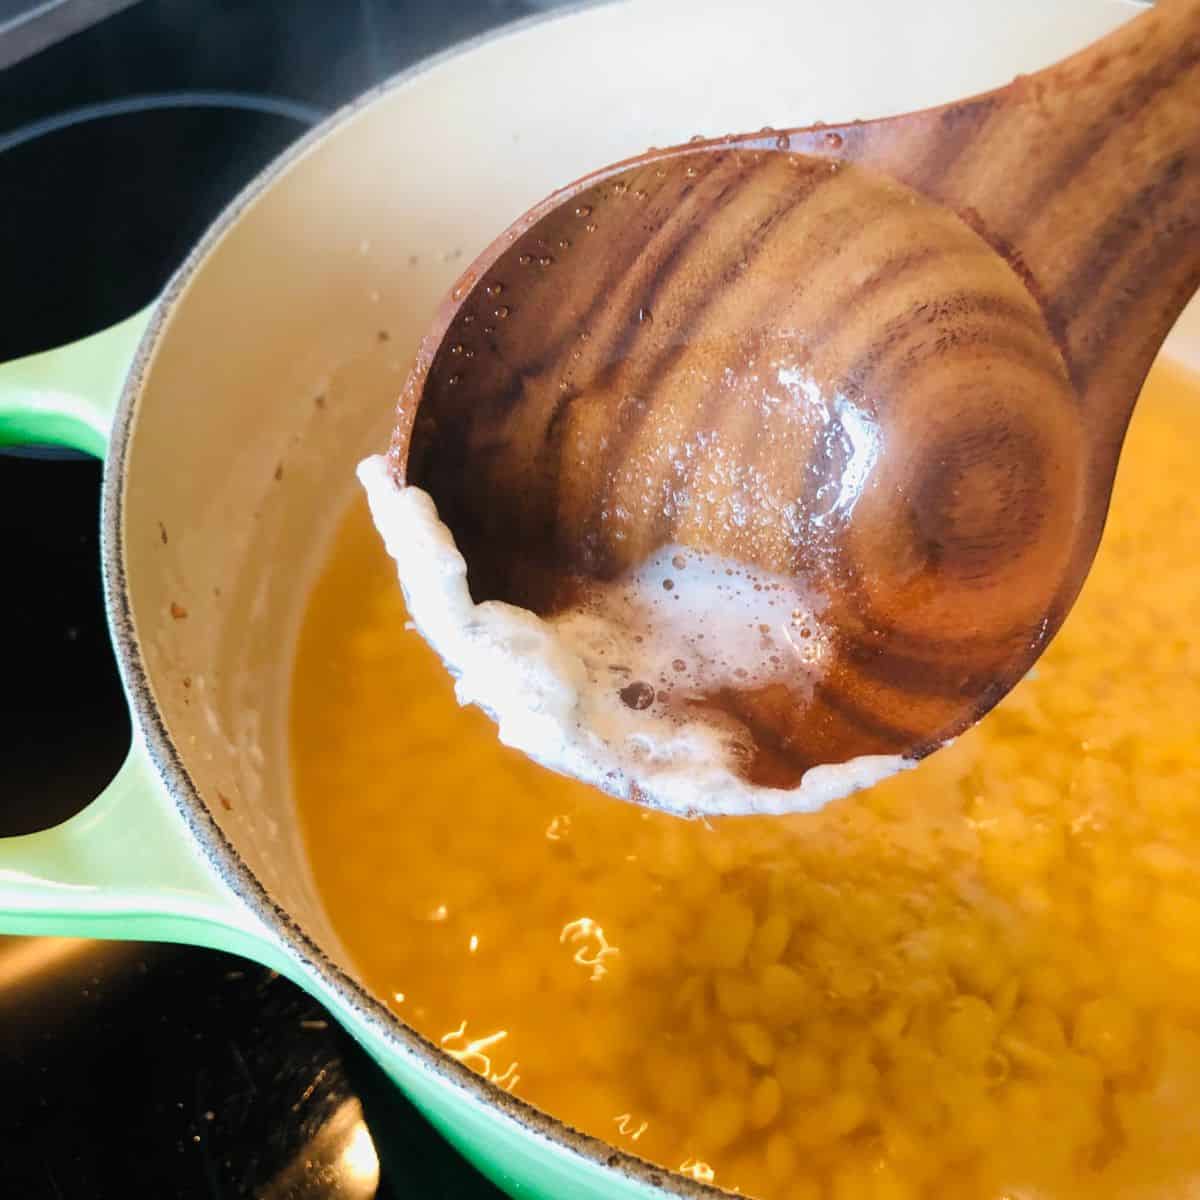 Close up of a wooden spoon containing foam from the surface of daal being cooked. The spoon is held over the pot of cooking daal.